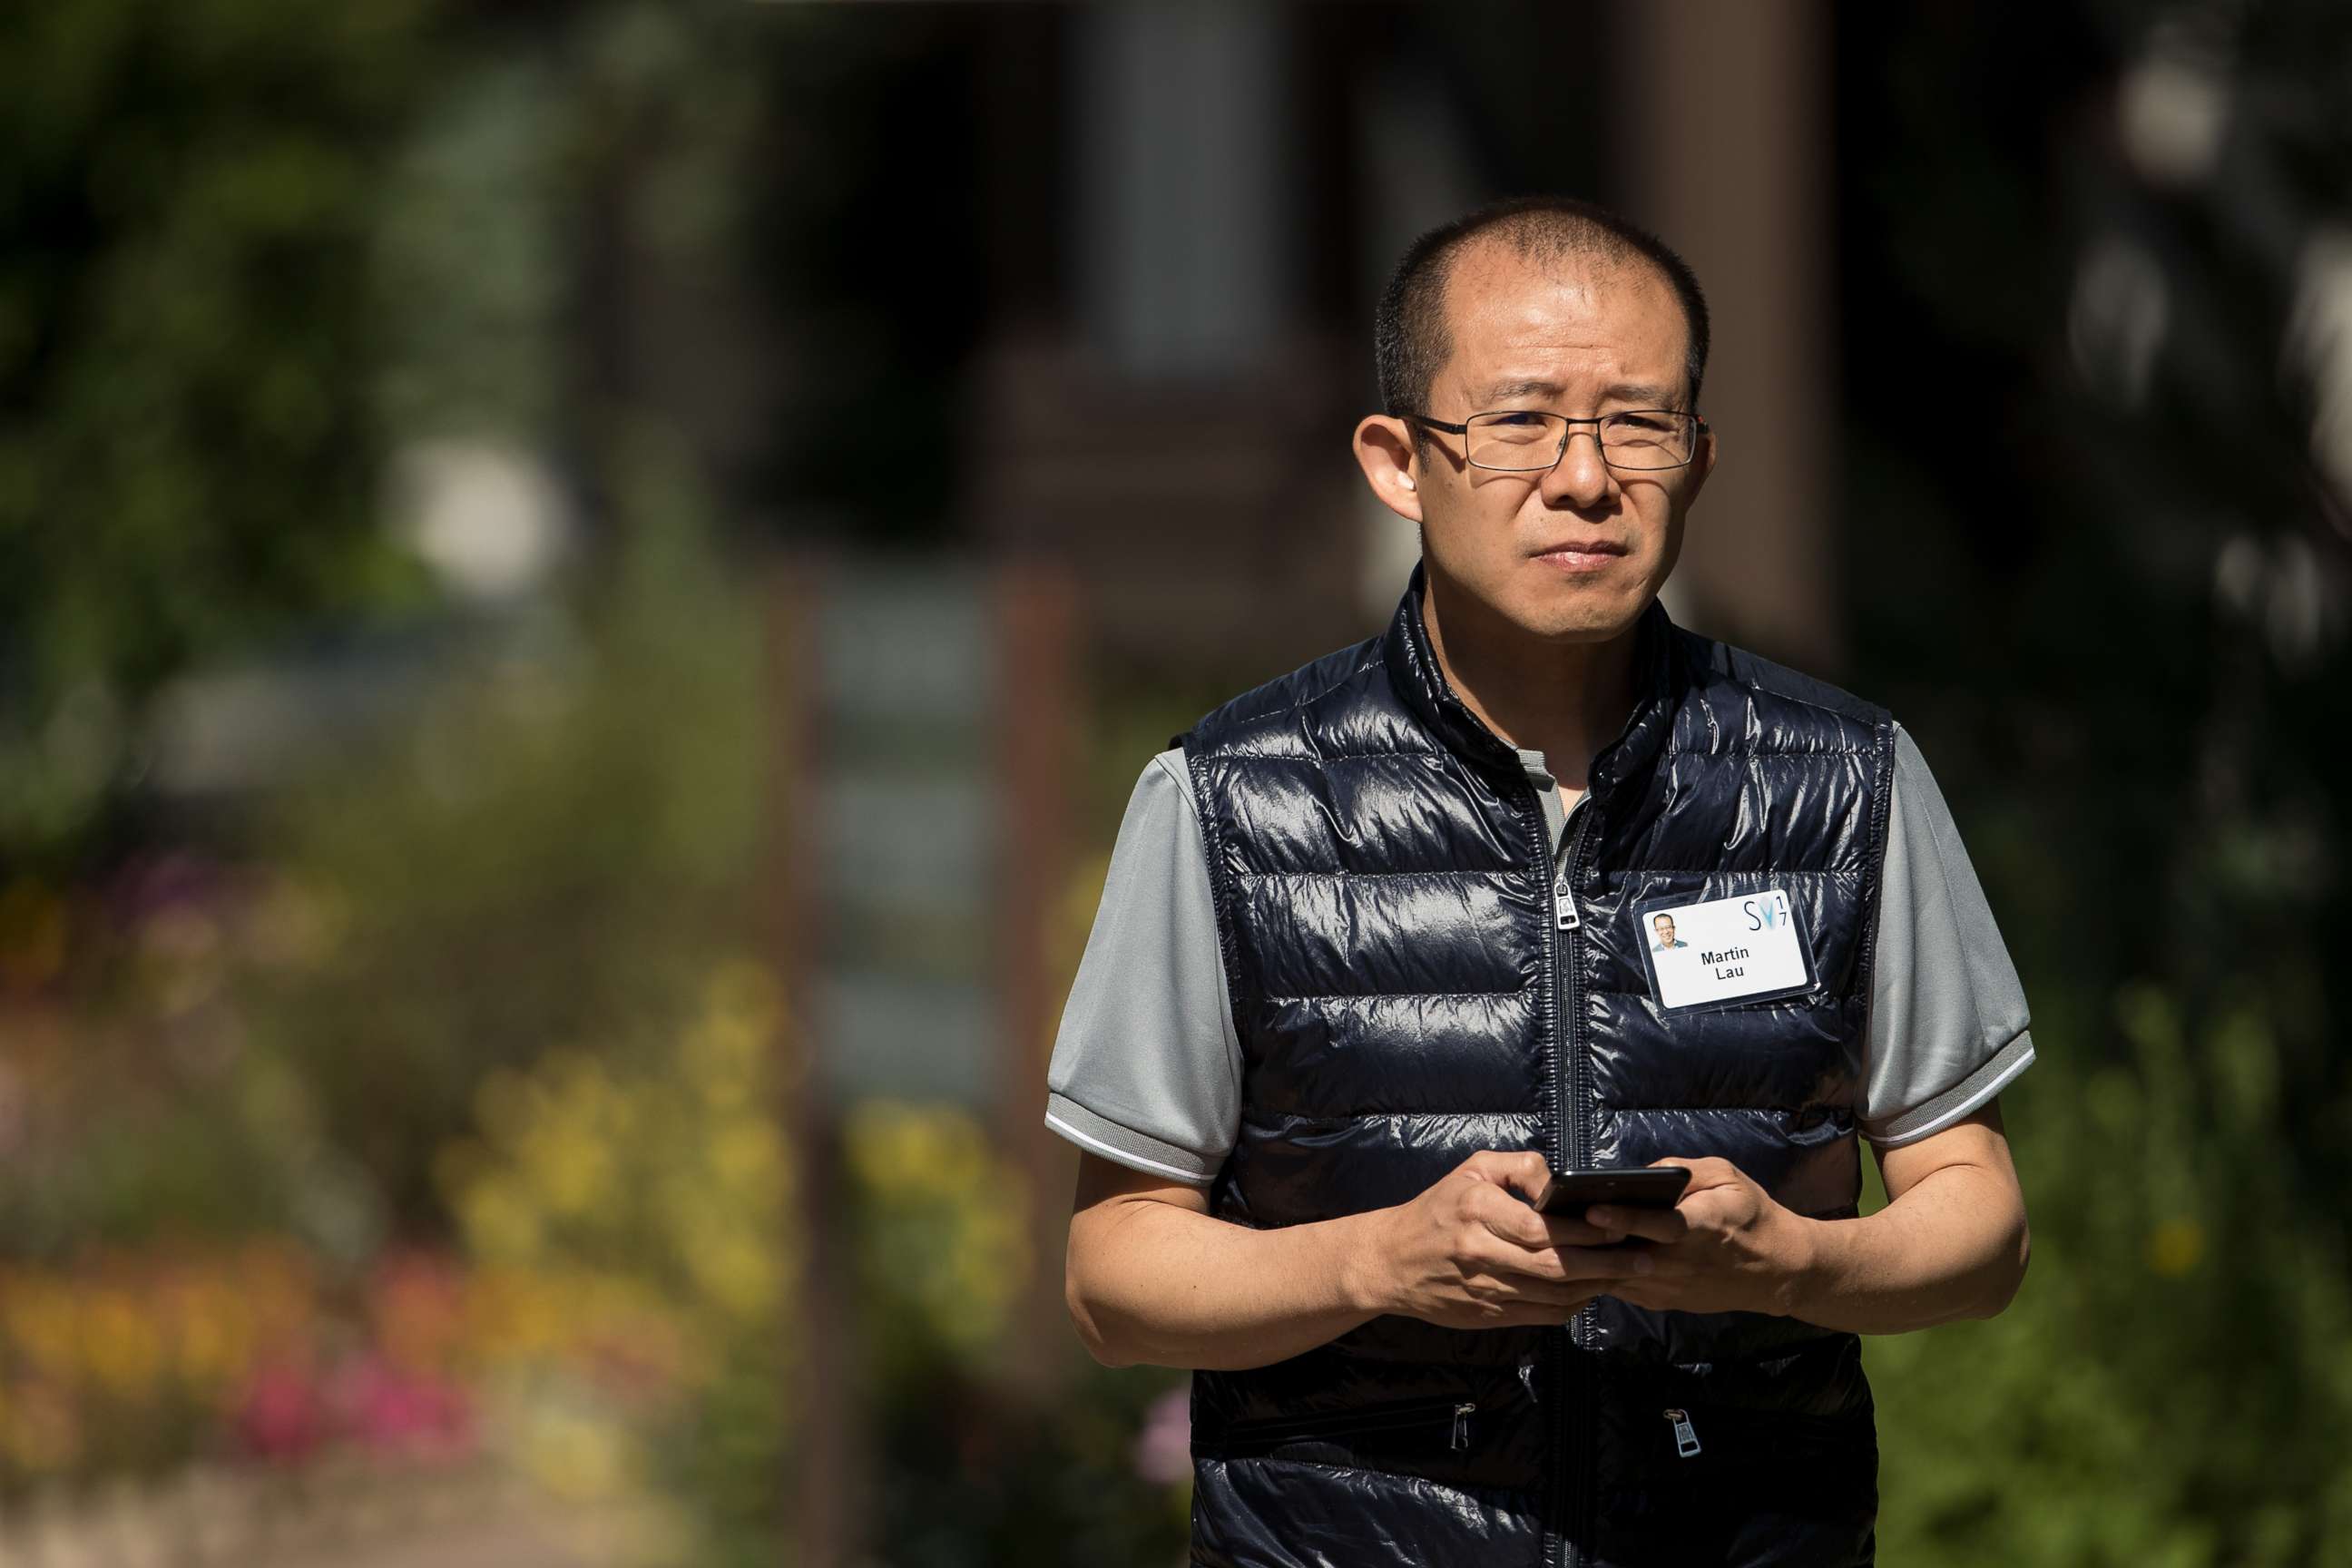 PHOTO: Martin Lau, president of Tencent Holdings, attends the third day of the annual Allen & Company Sun Valley Conference, July 13, 2017 in Sun Valley, Idaho.  